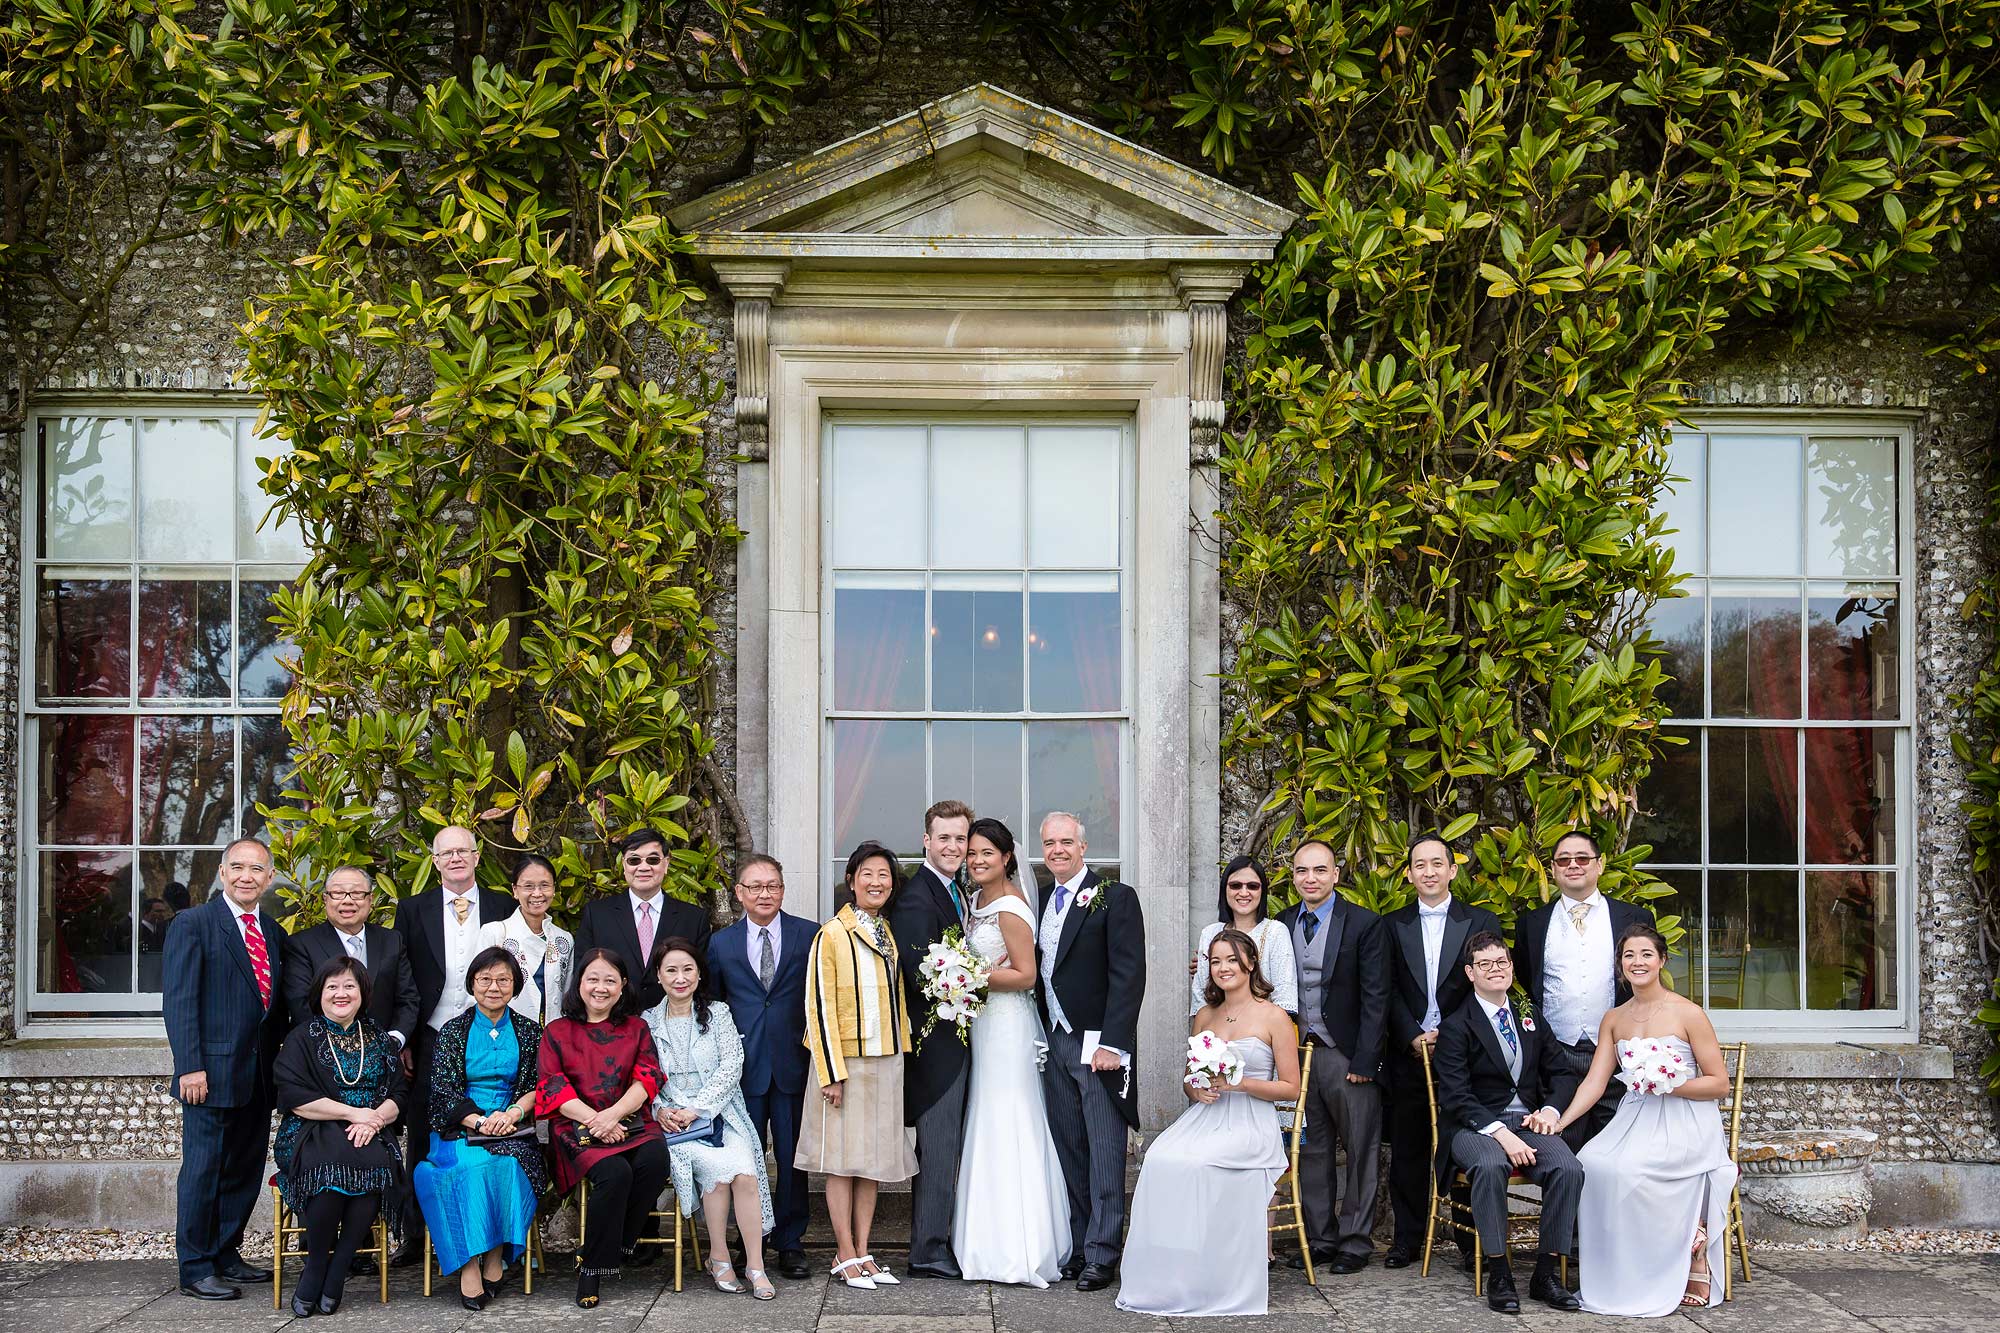 Wedding groups at Goodwood House